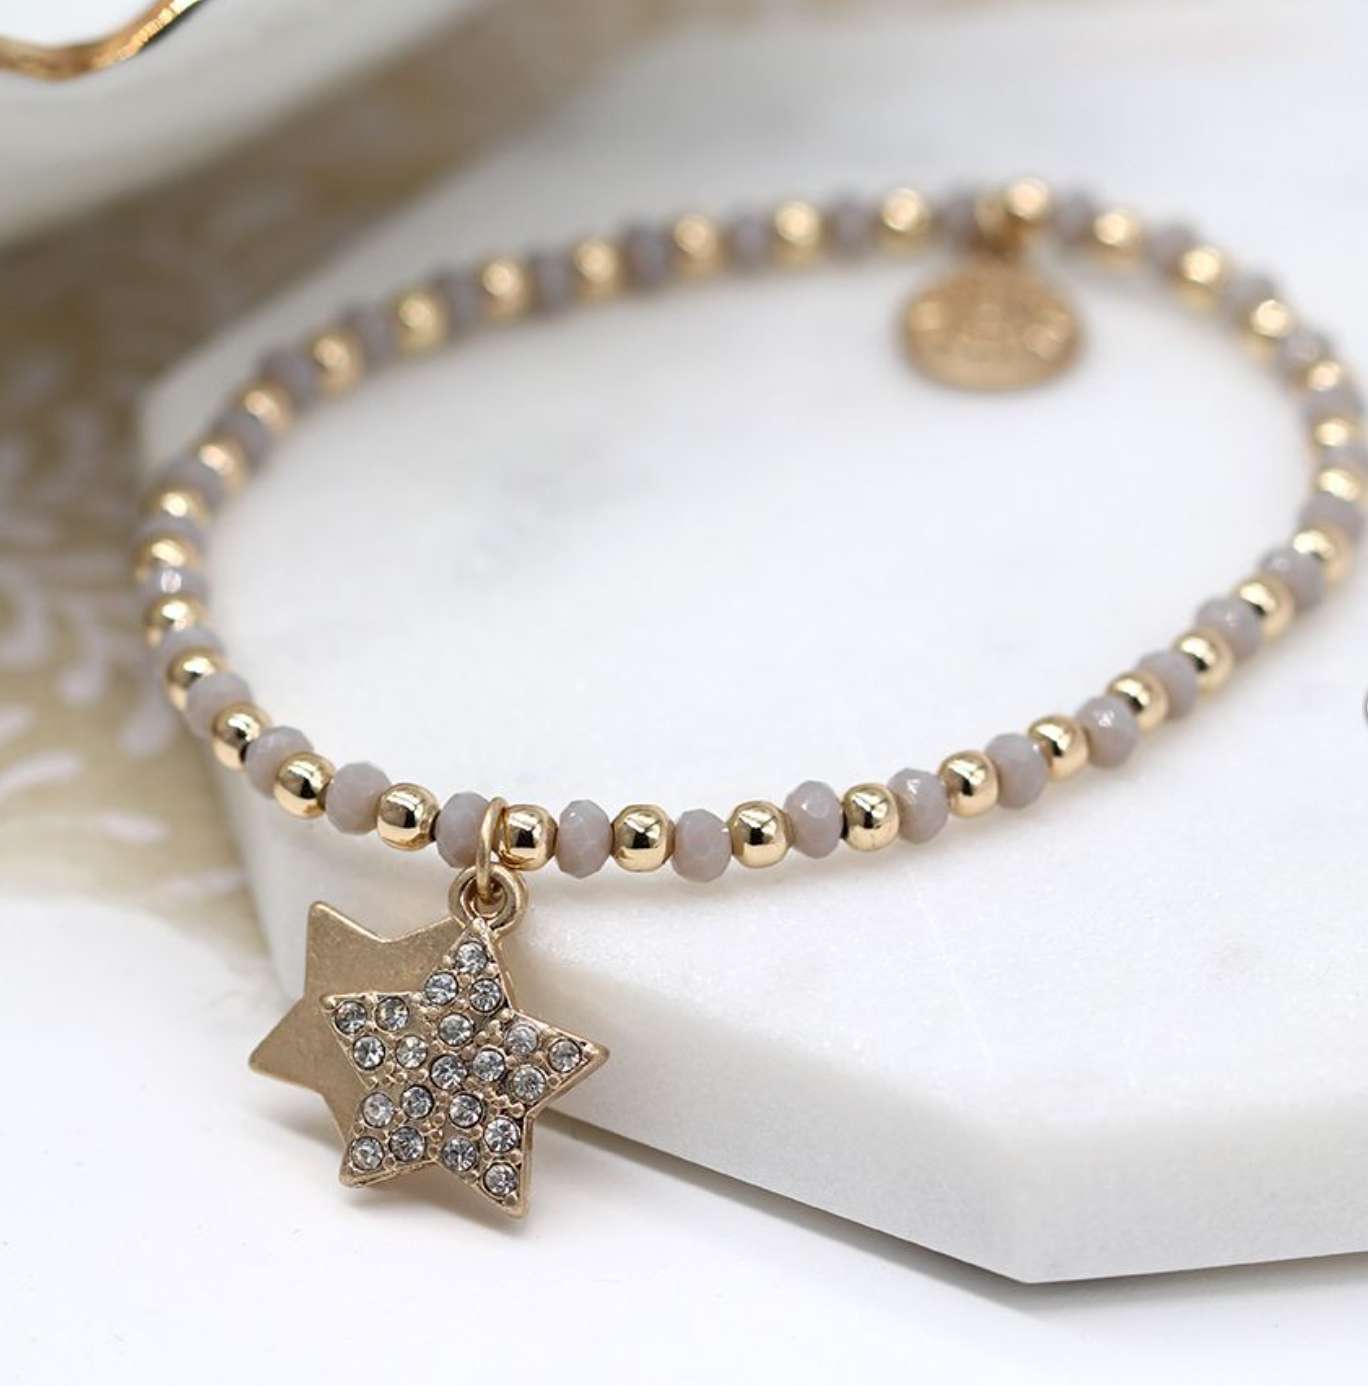 Gold/Grey  braclet with  charms